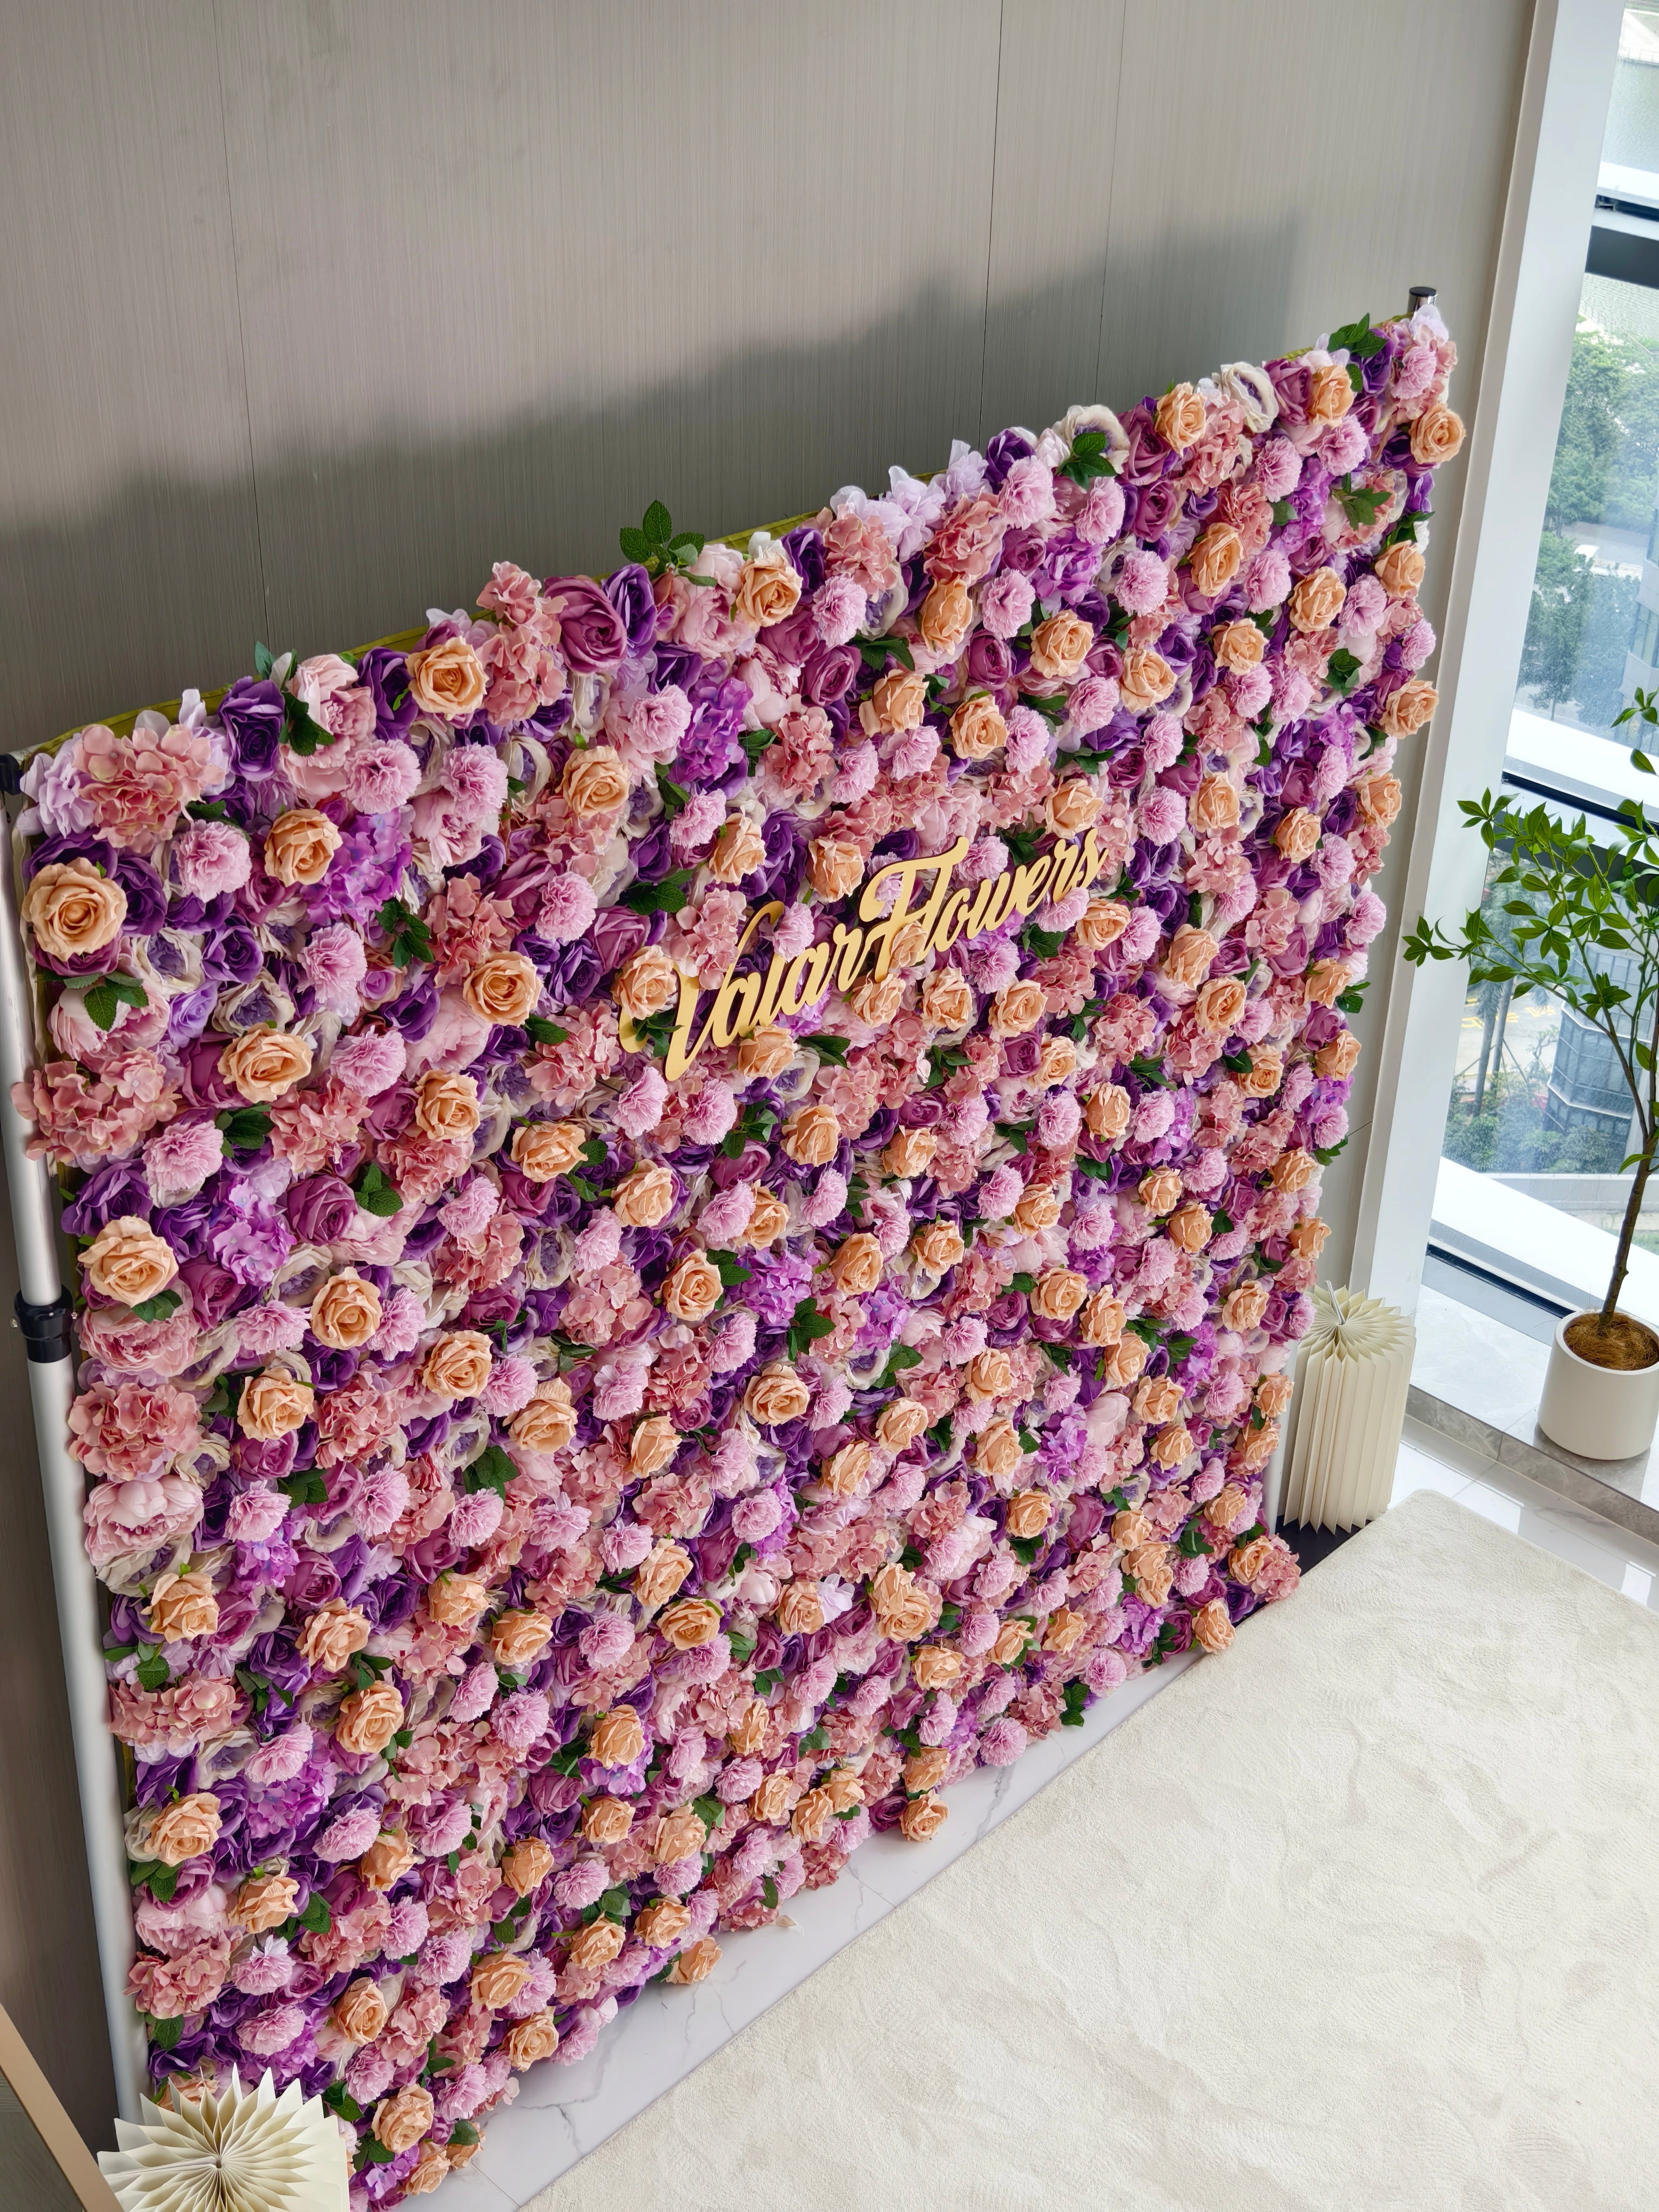 ValarFlowers Artificial Floral Wall Backdrop: Lavish Lavender Lushness - The Radiance of Rosy Romance